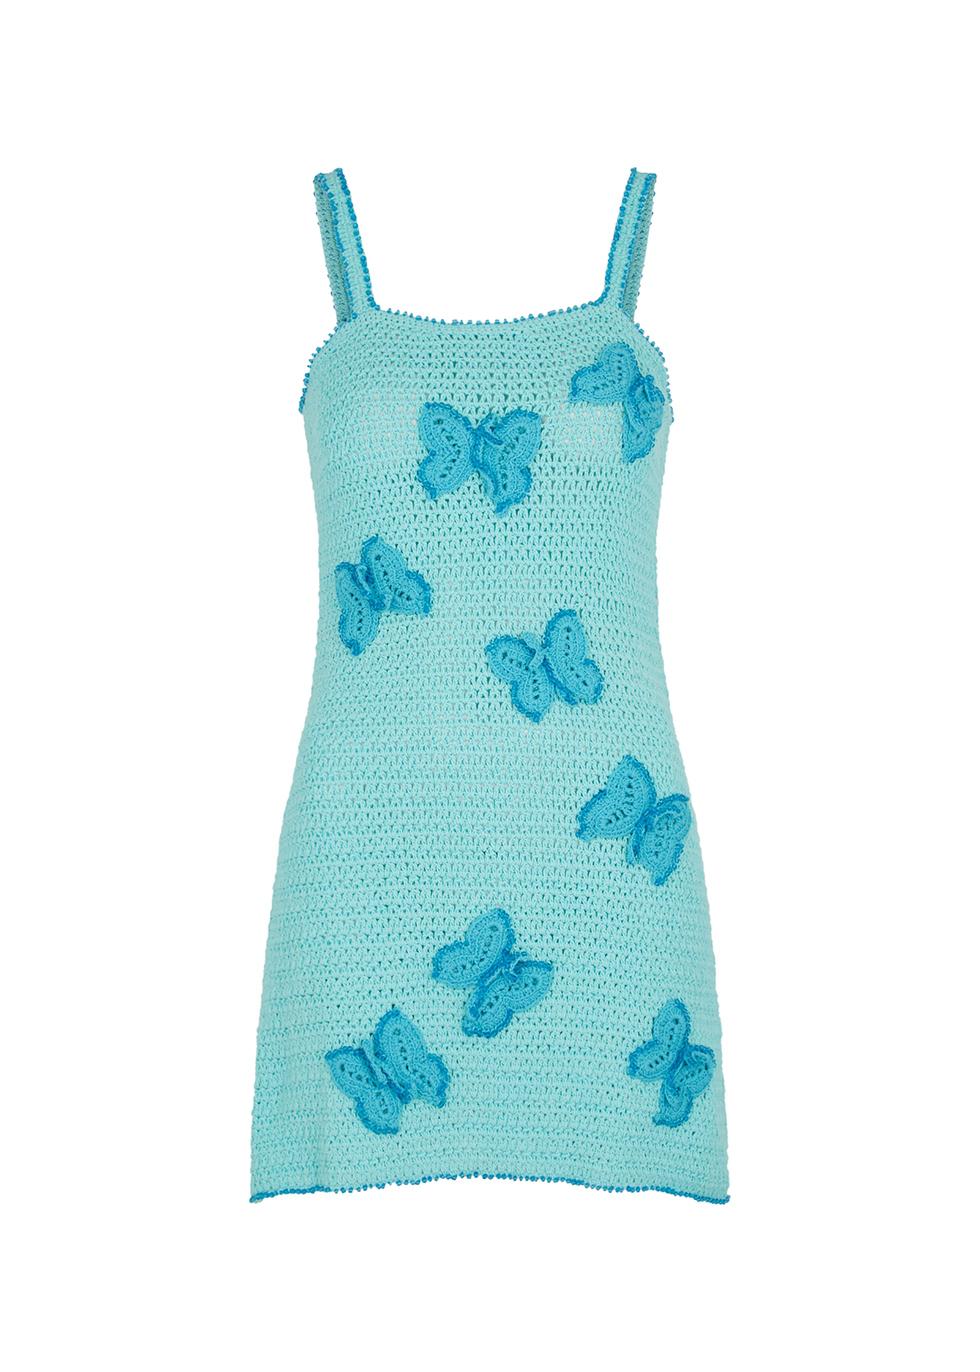 Beaded Butterfly turquoise crochet mini dress by CRO-CHE